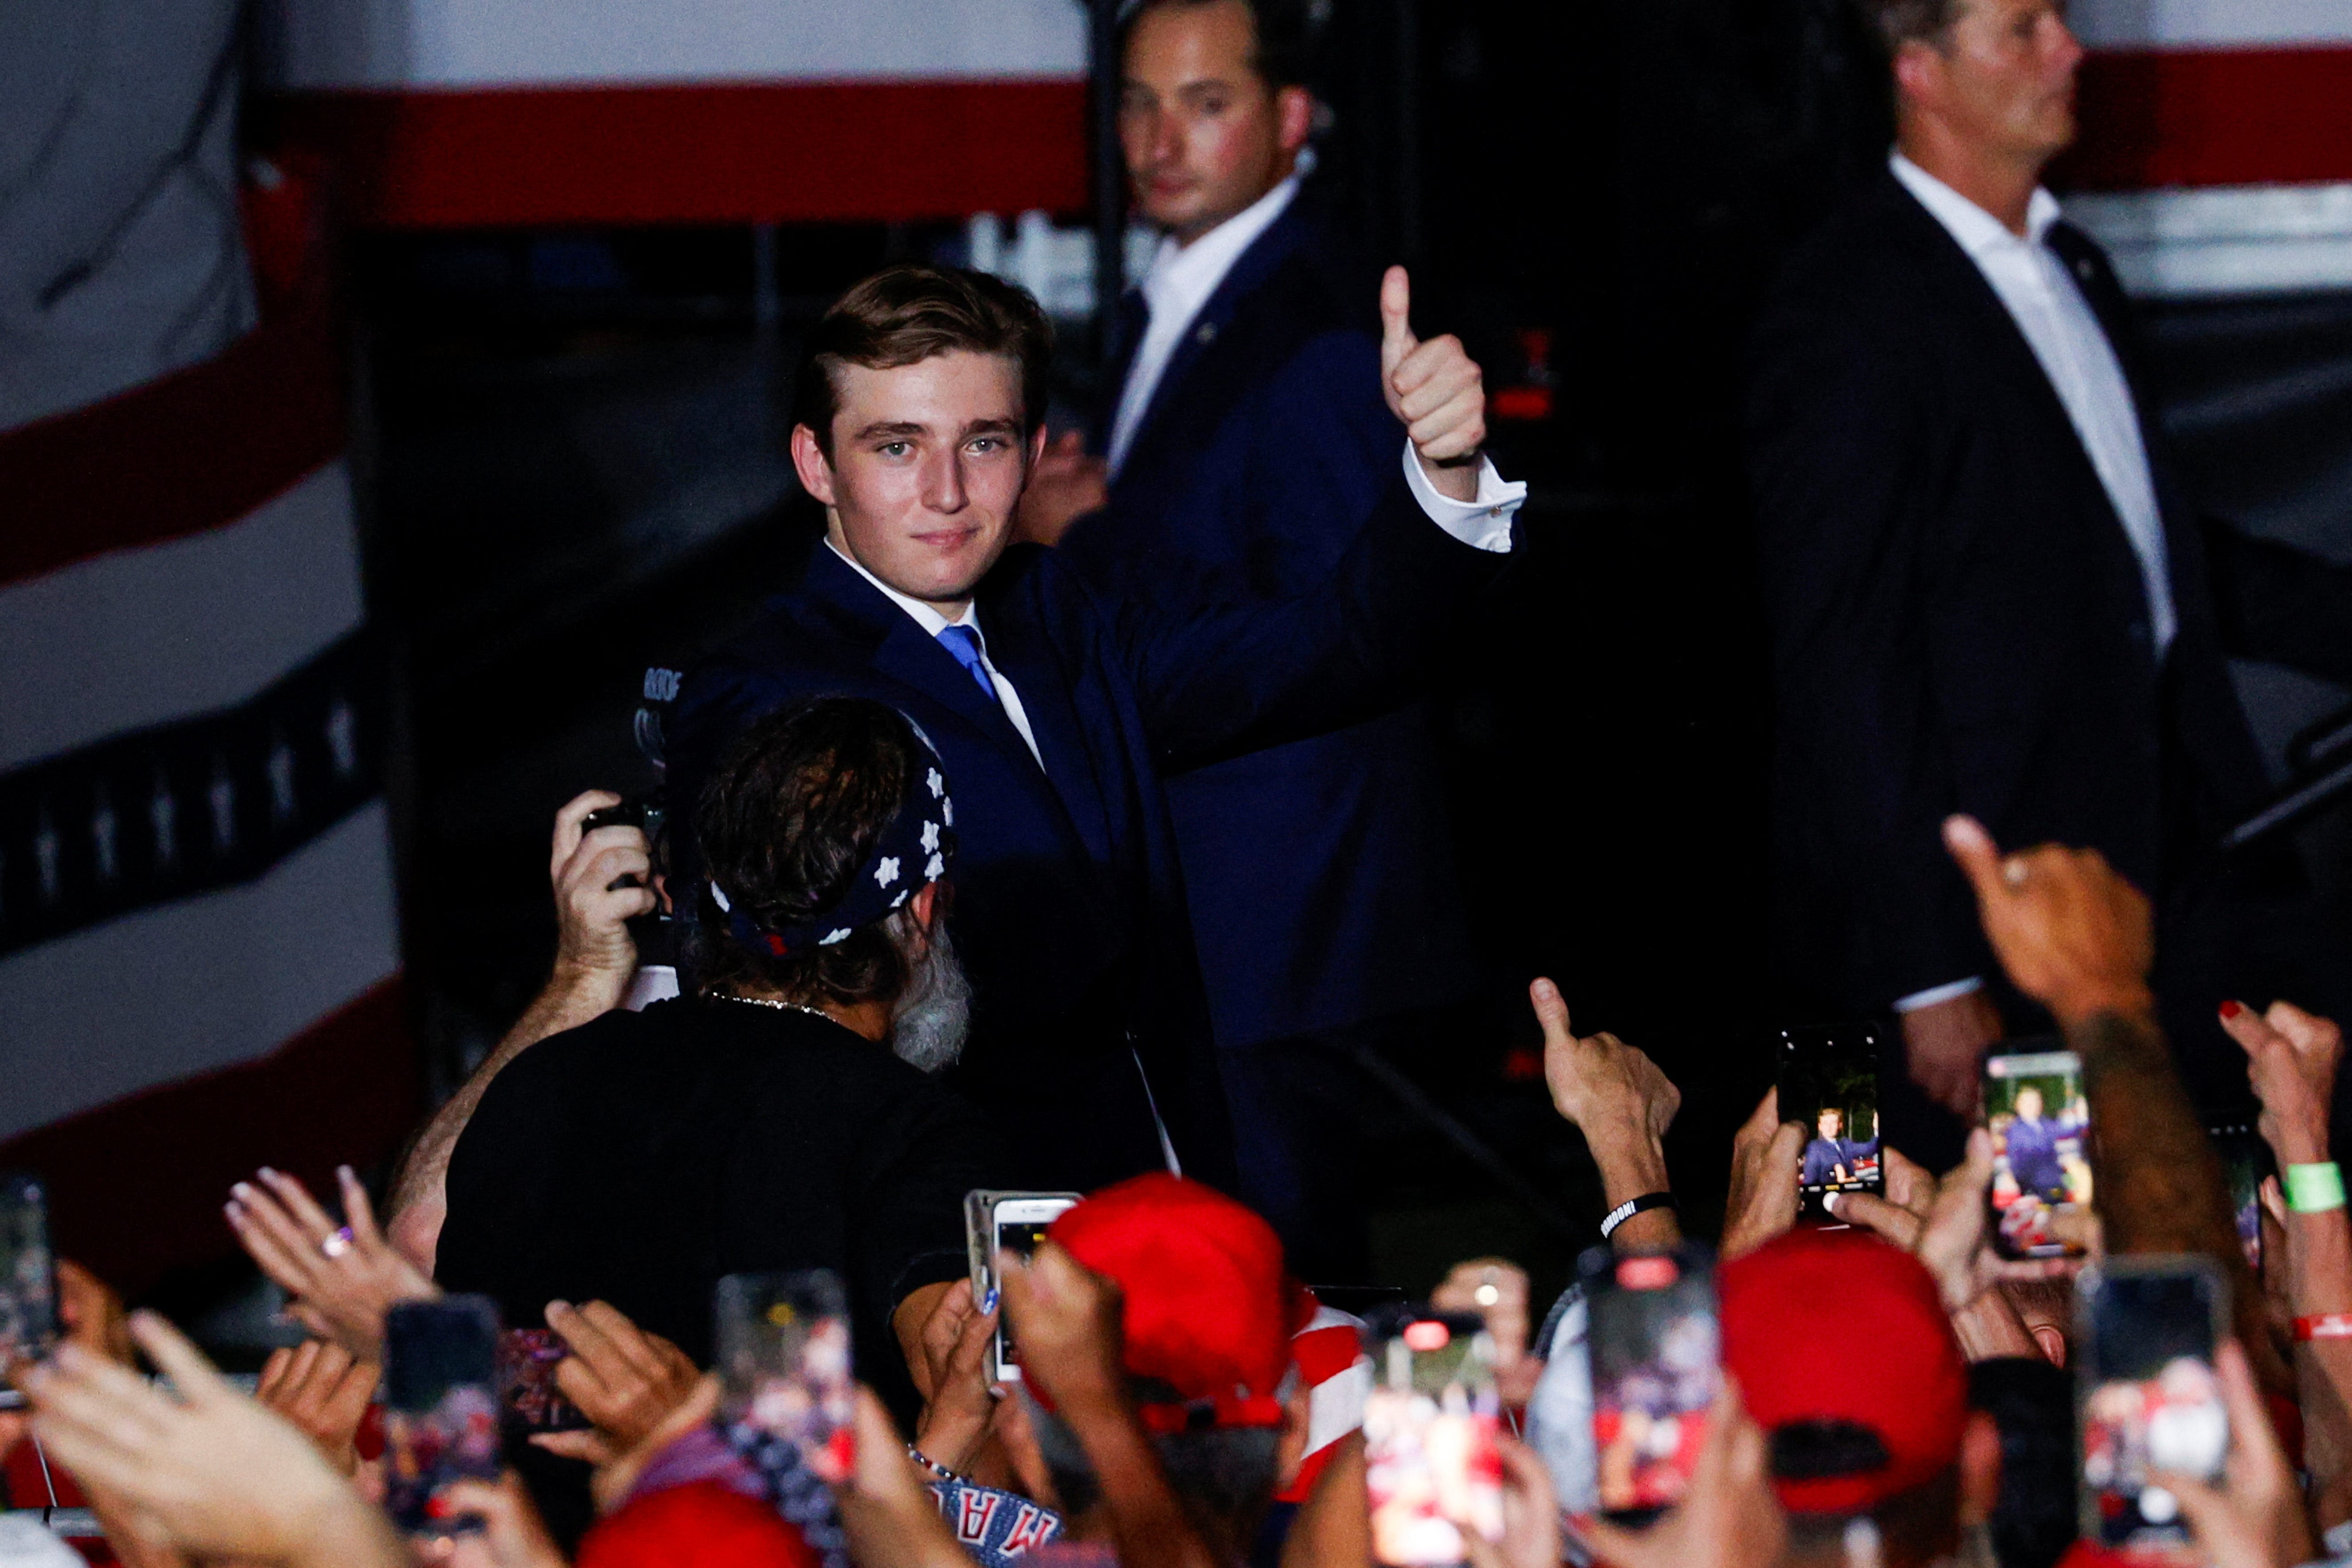 Barron Trump, Donald and Melania's son: Info about schools, when he had COVID, sibling support